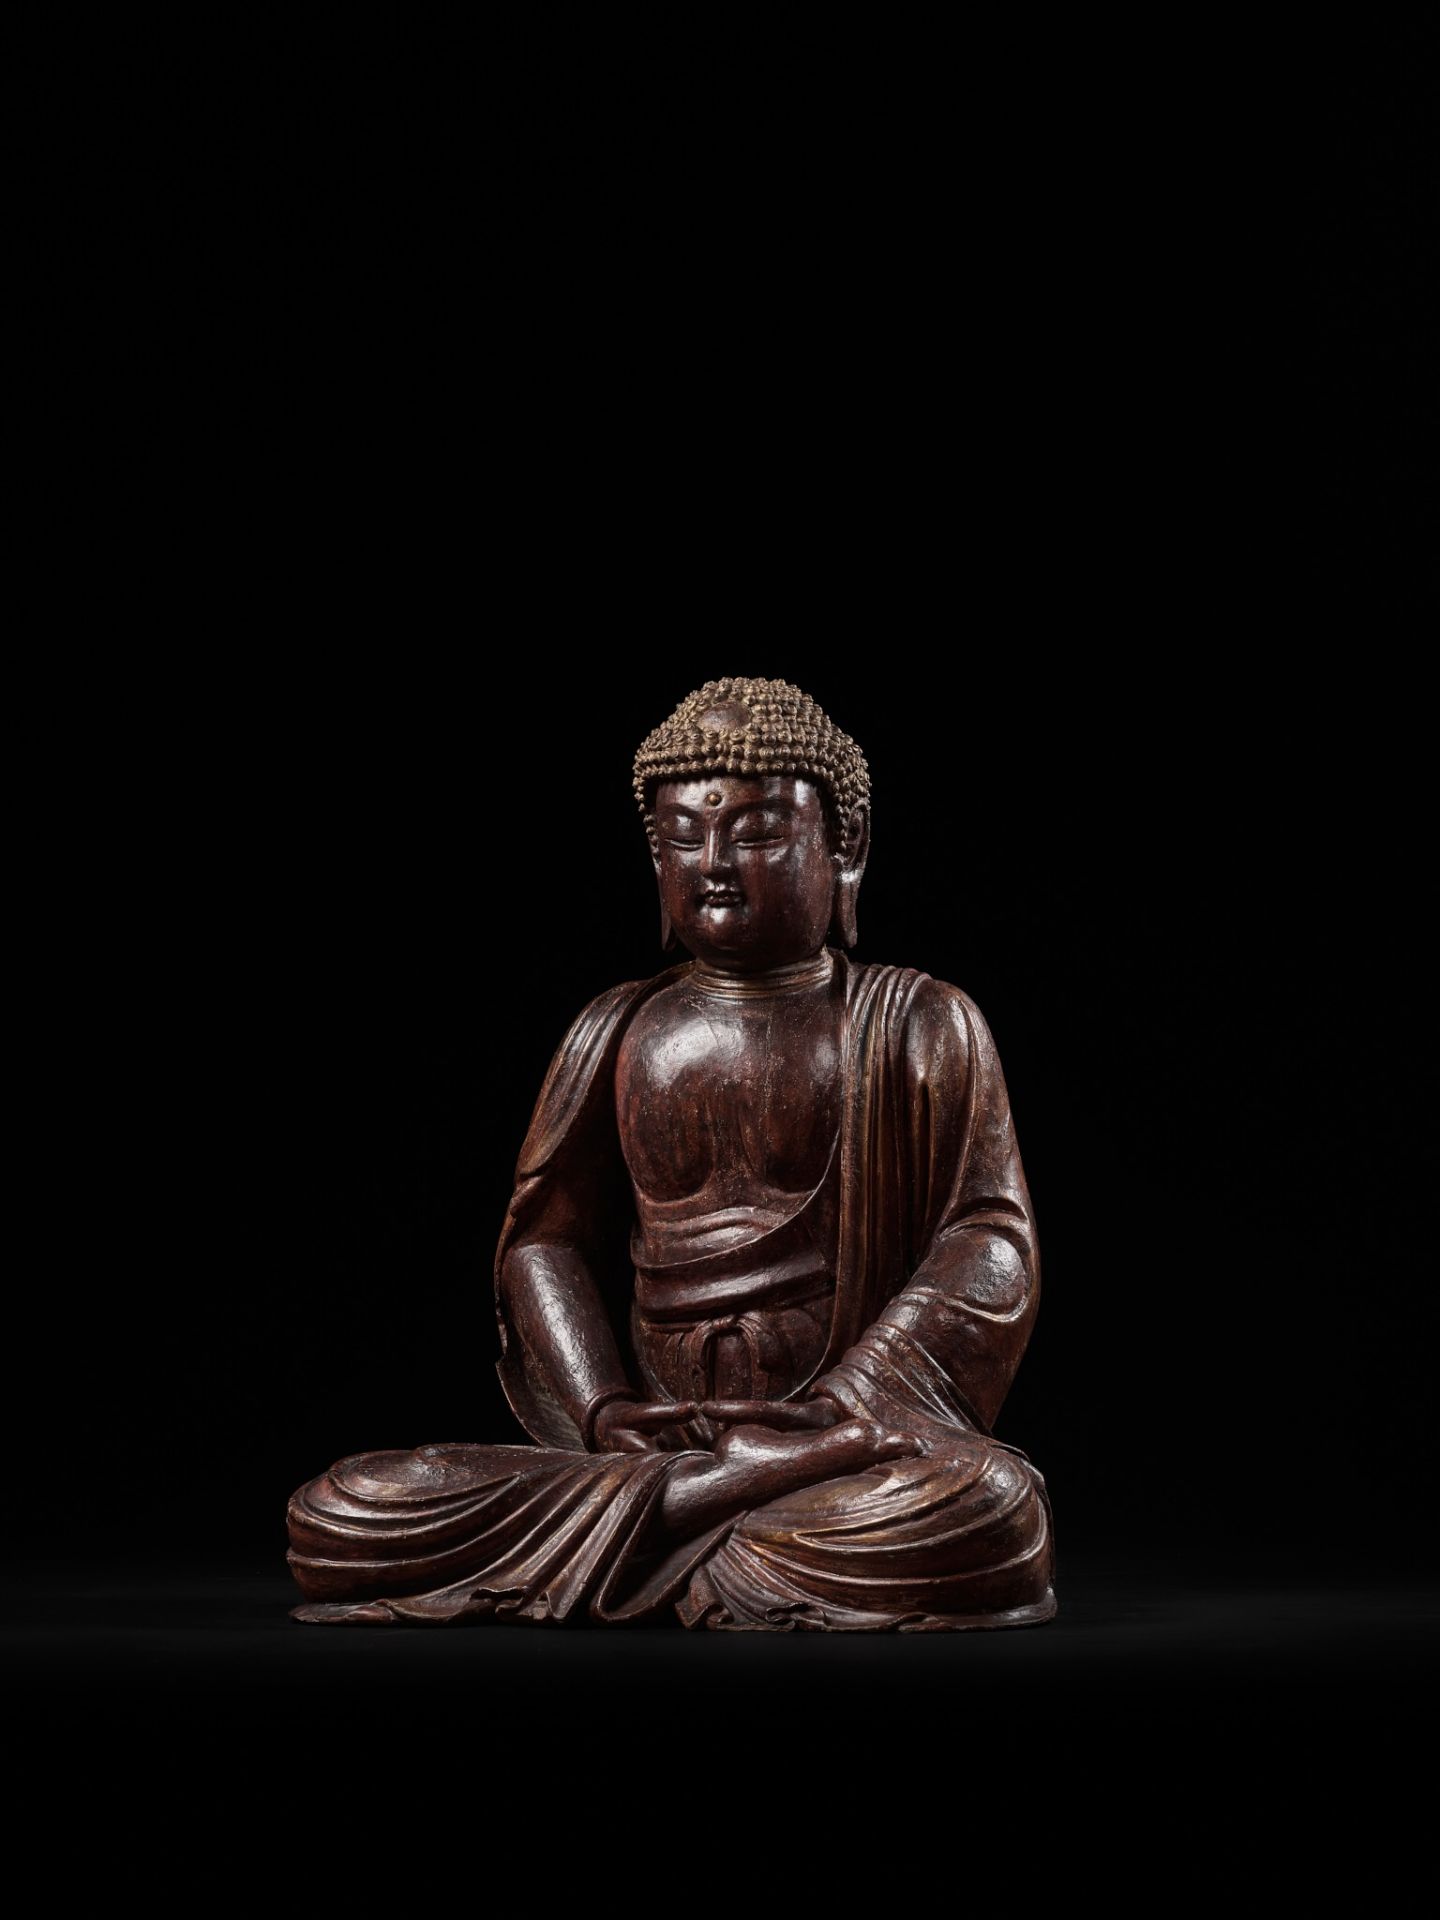 A LARGE LACQUERED WOOD FIGURE OF BUDDHA, LATE MING/EARLY QING DYNASTY, CIRCA 17TH CENTURY - Image 2 of 9